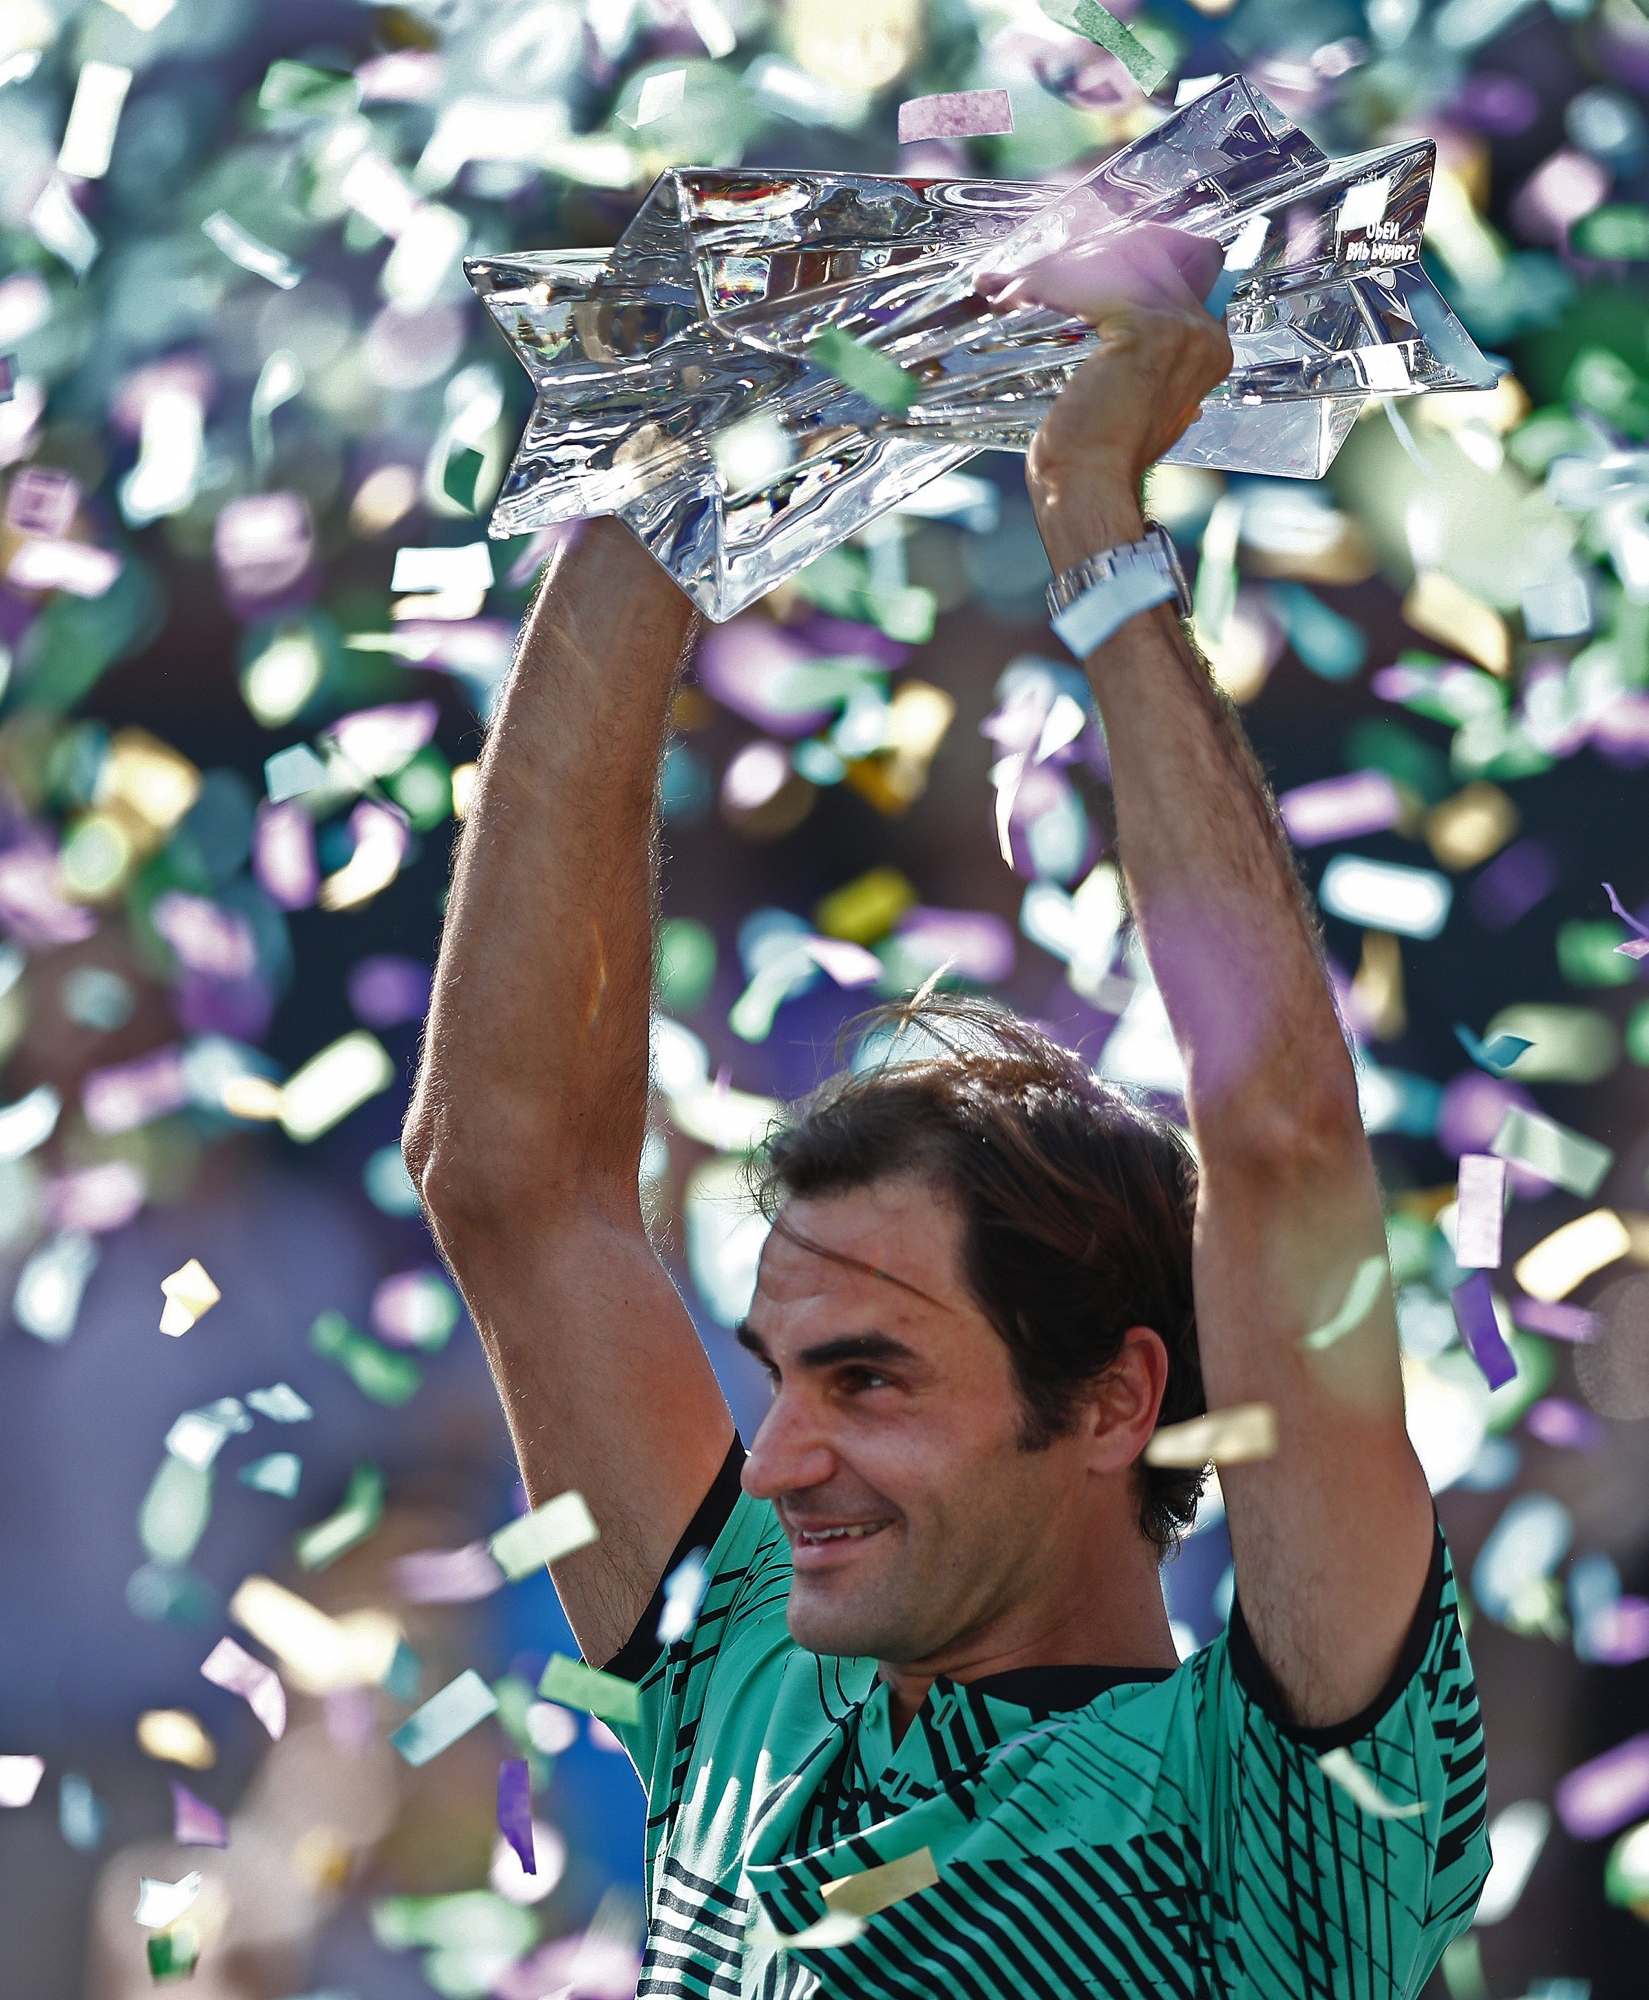 epa05858975 Roger Federer of Switzerland holds the trophy after winning the final against Stan Wawrinka of Switzerland in their finals match at the 2017 BNP Paribas Open tennis tournament at the Indian Wells Tennis Garden in Indian Wells, California, USA 19 March 2017.  EPA/LARRY W. SMITH